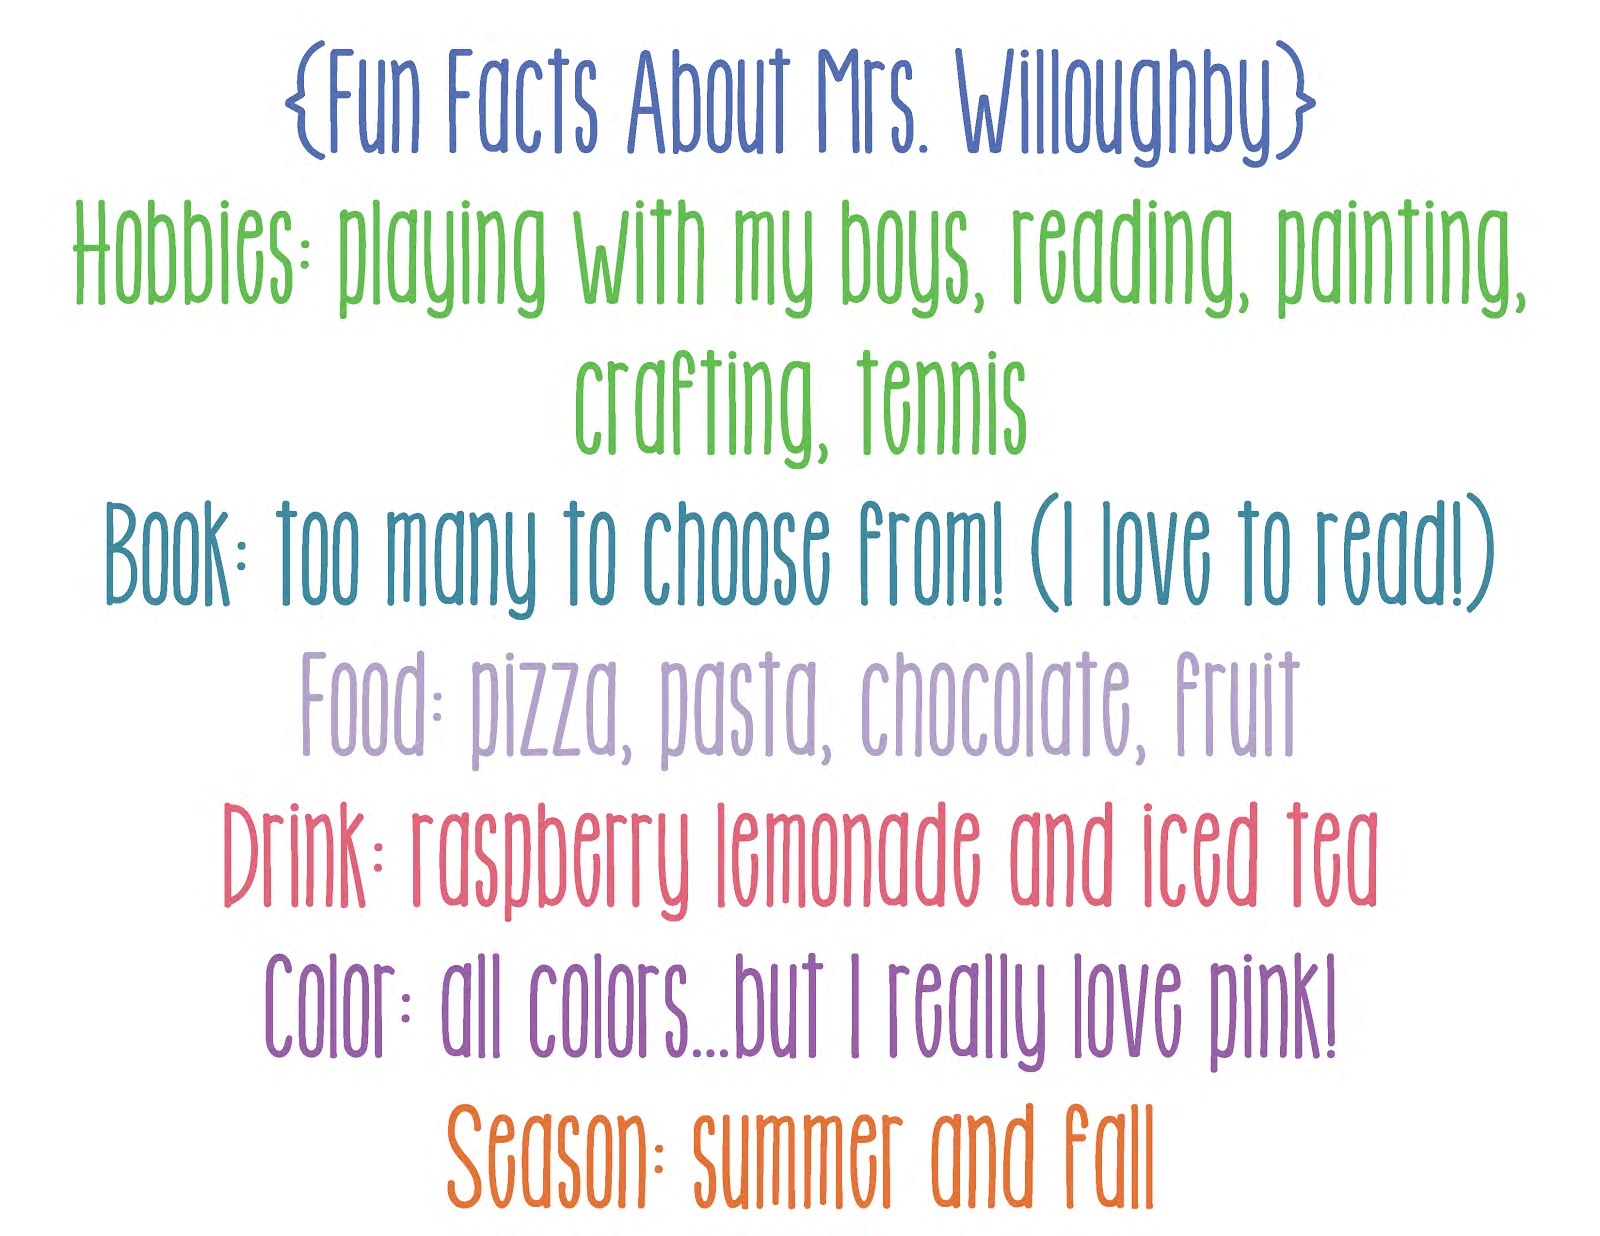 Fun Facts About Mrs. Willoughby